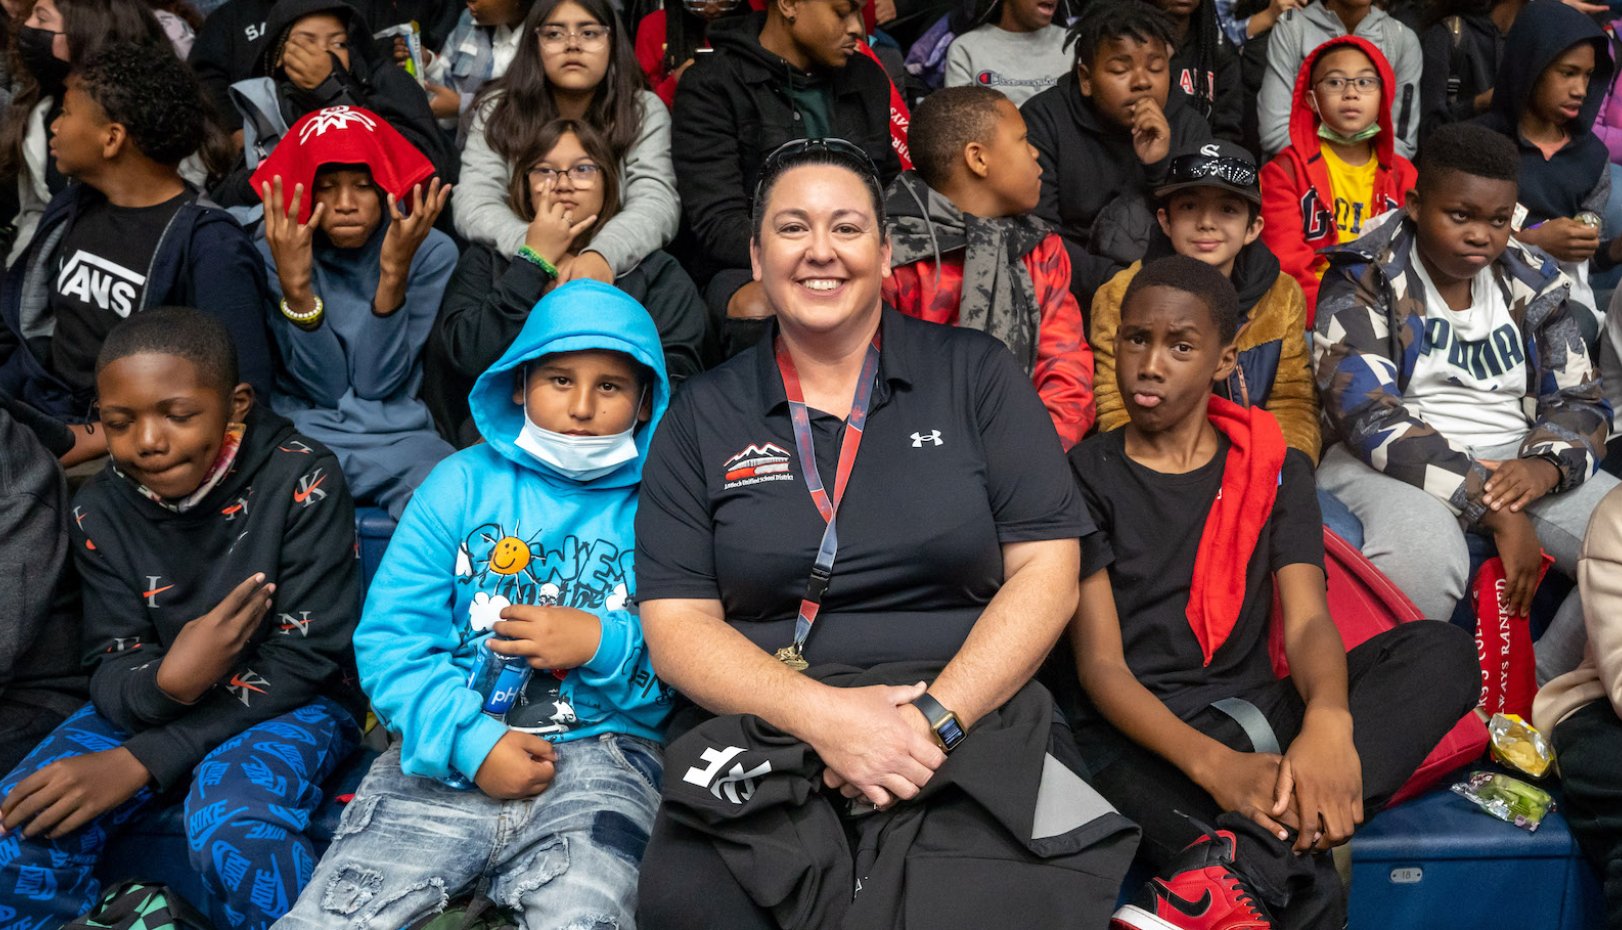 Lindsay Lopez-Wisely '04 sits amongst middle school students at a basketball game